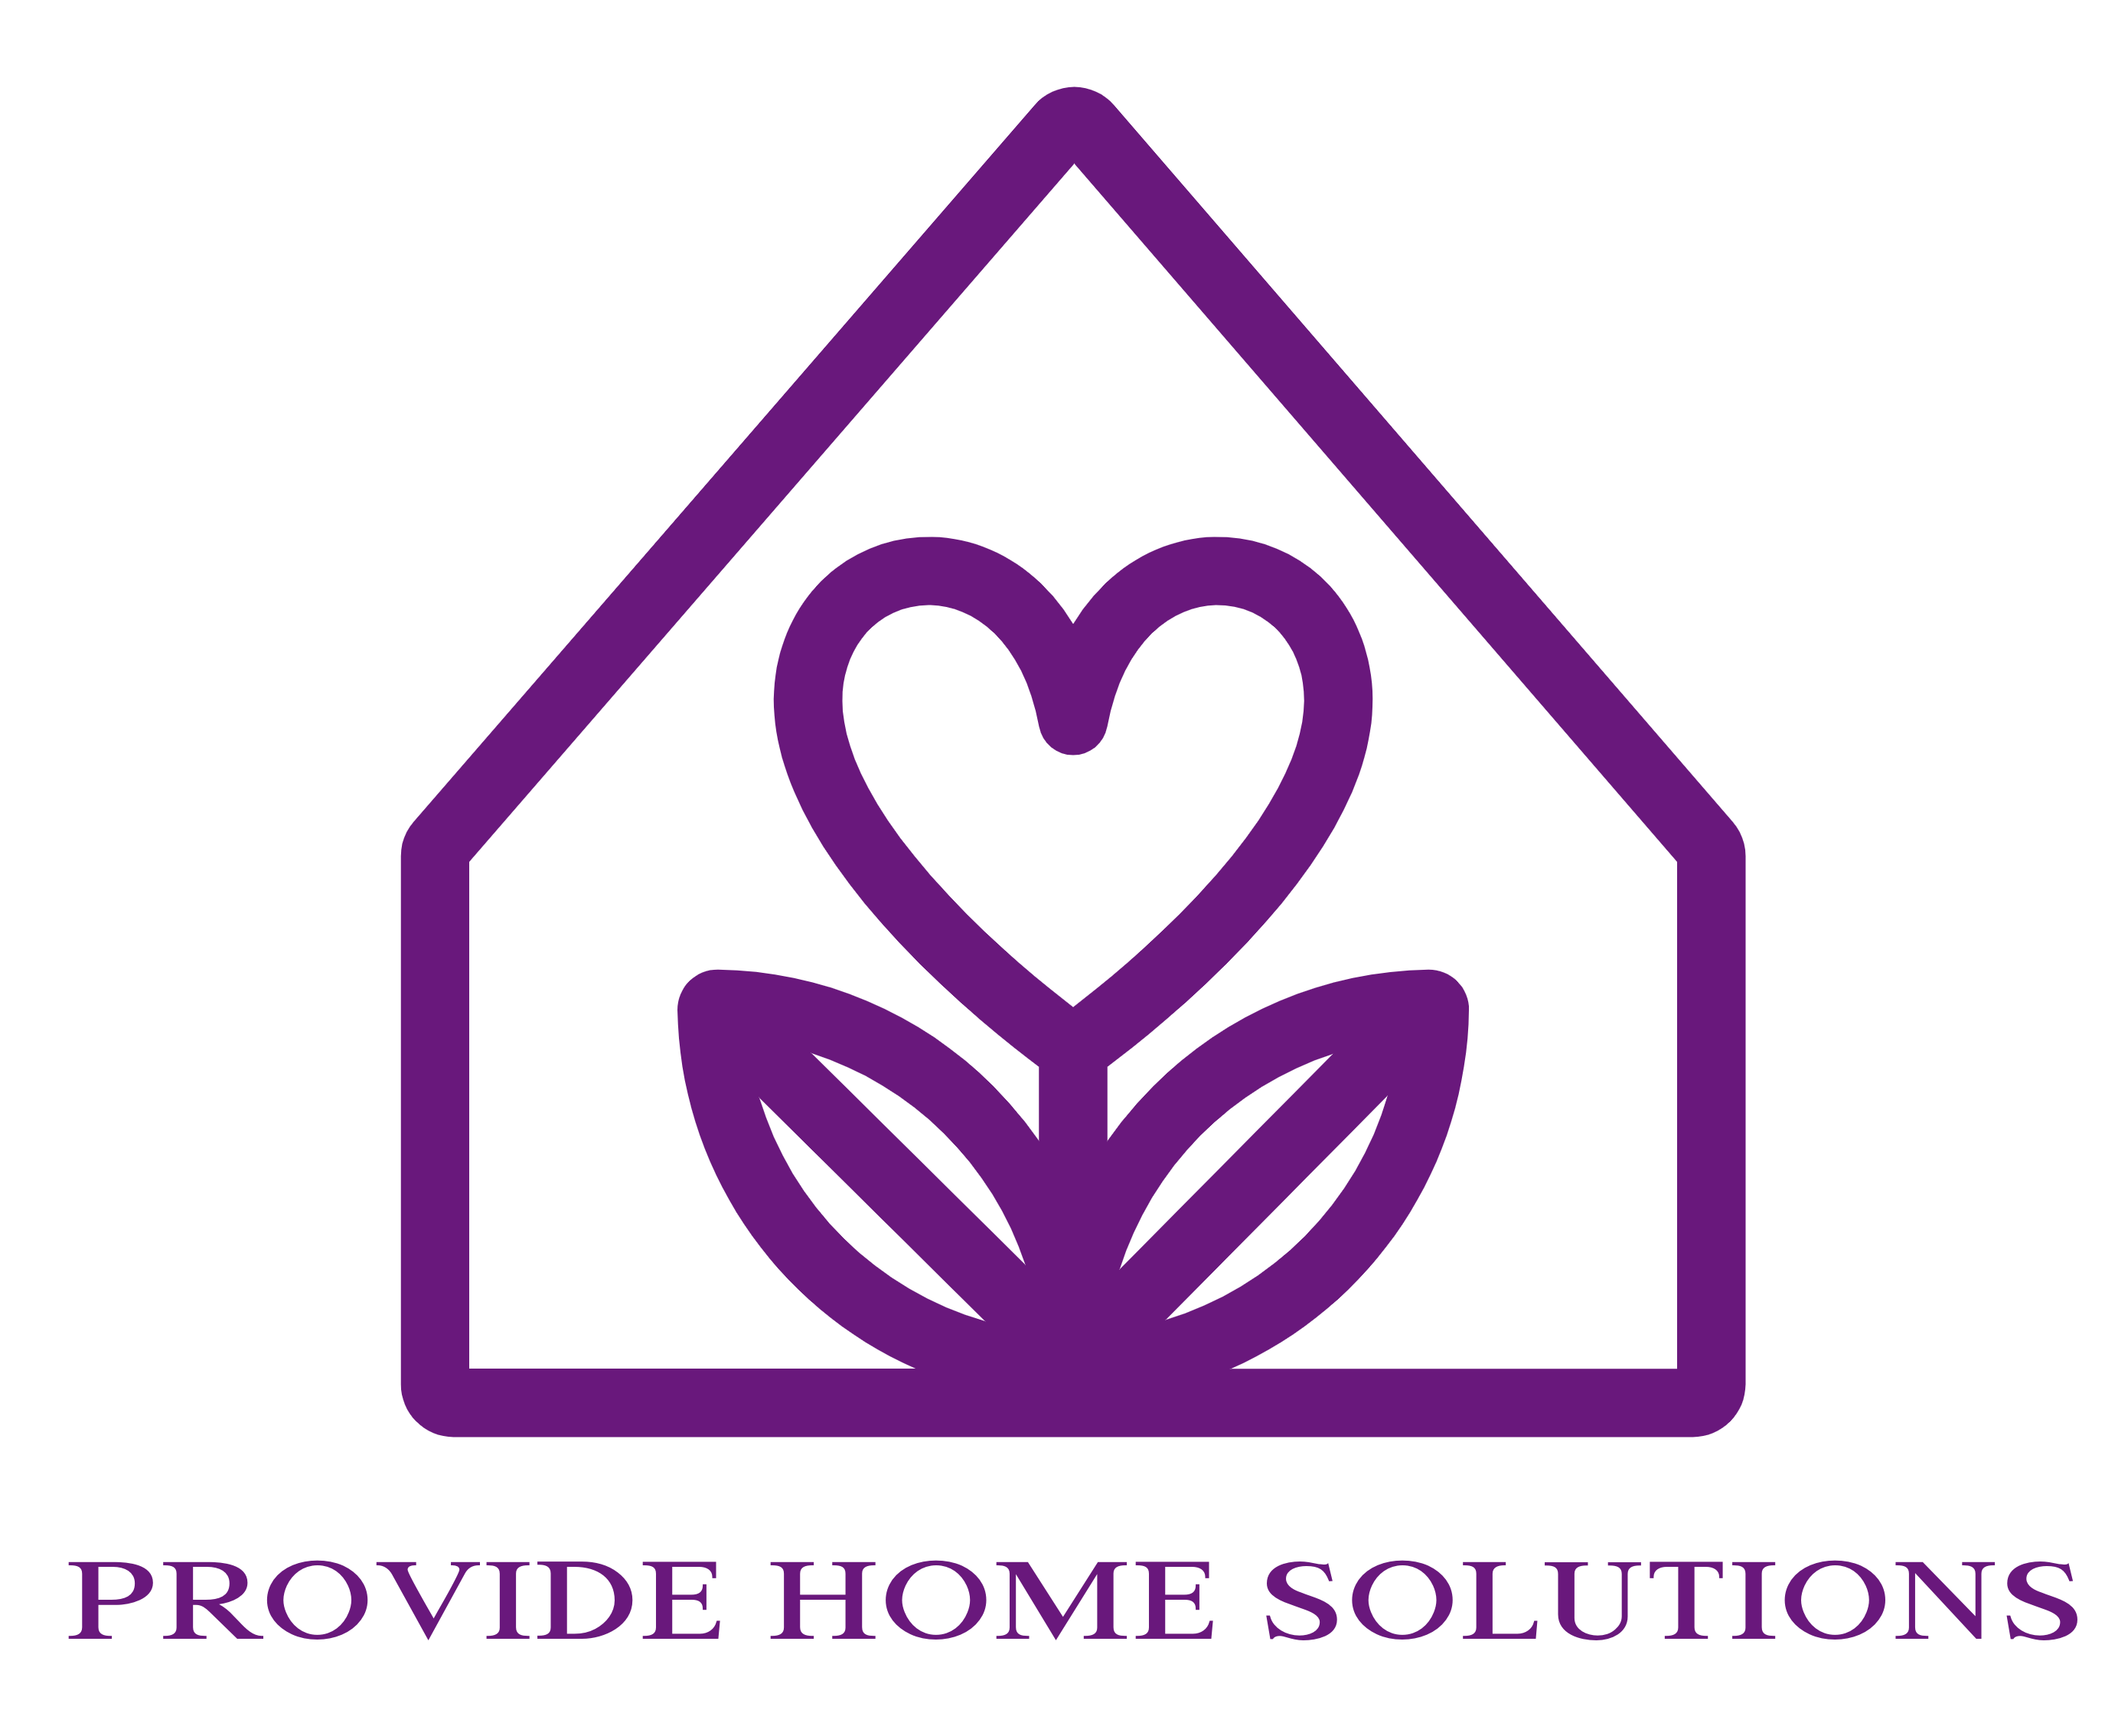 Provide Home Solutions